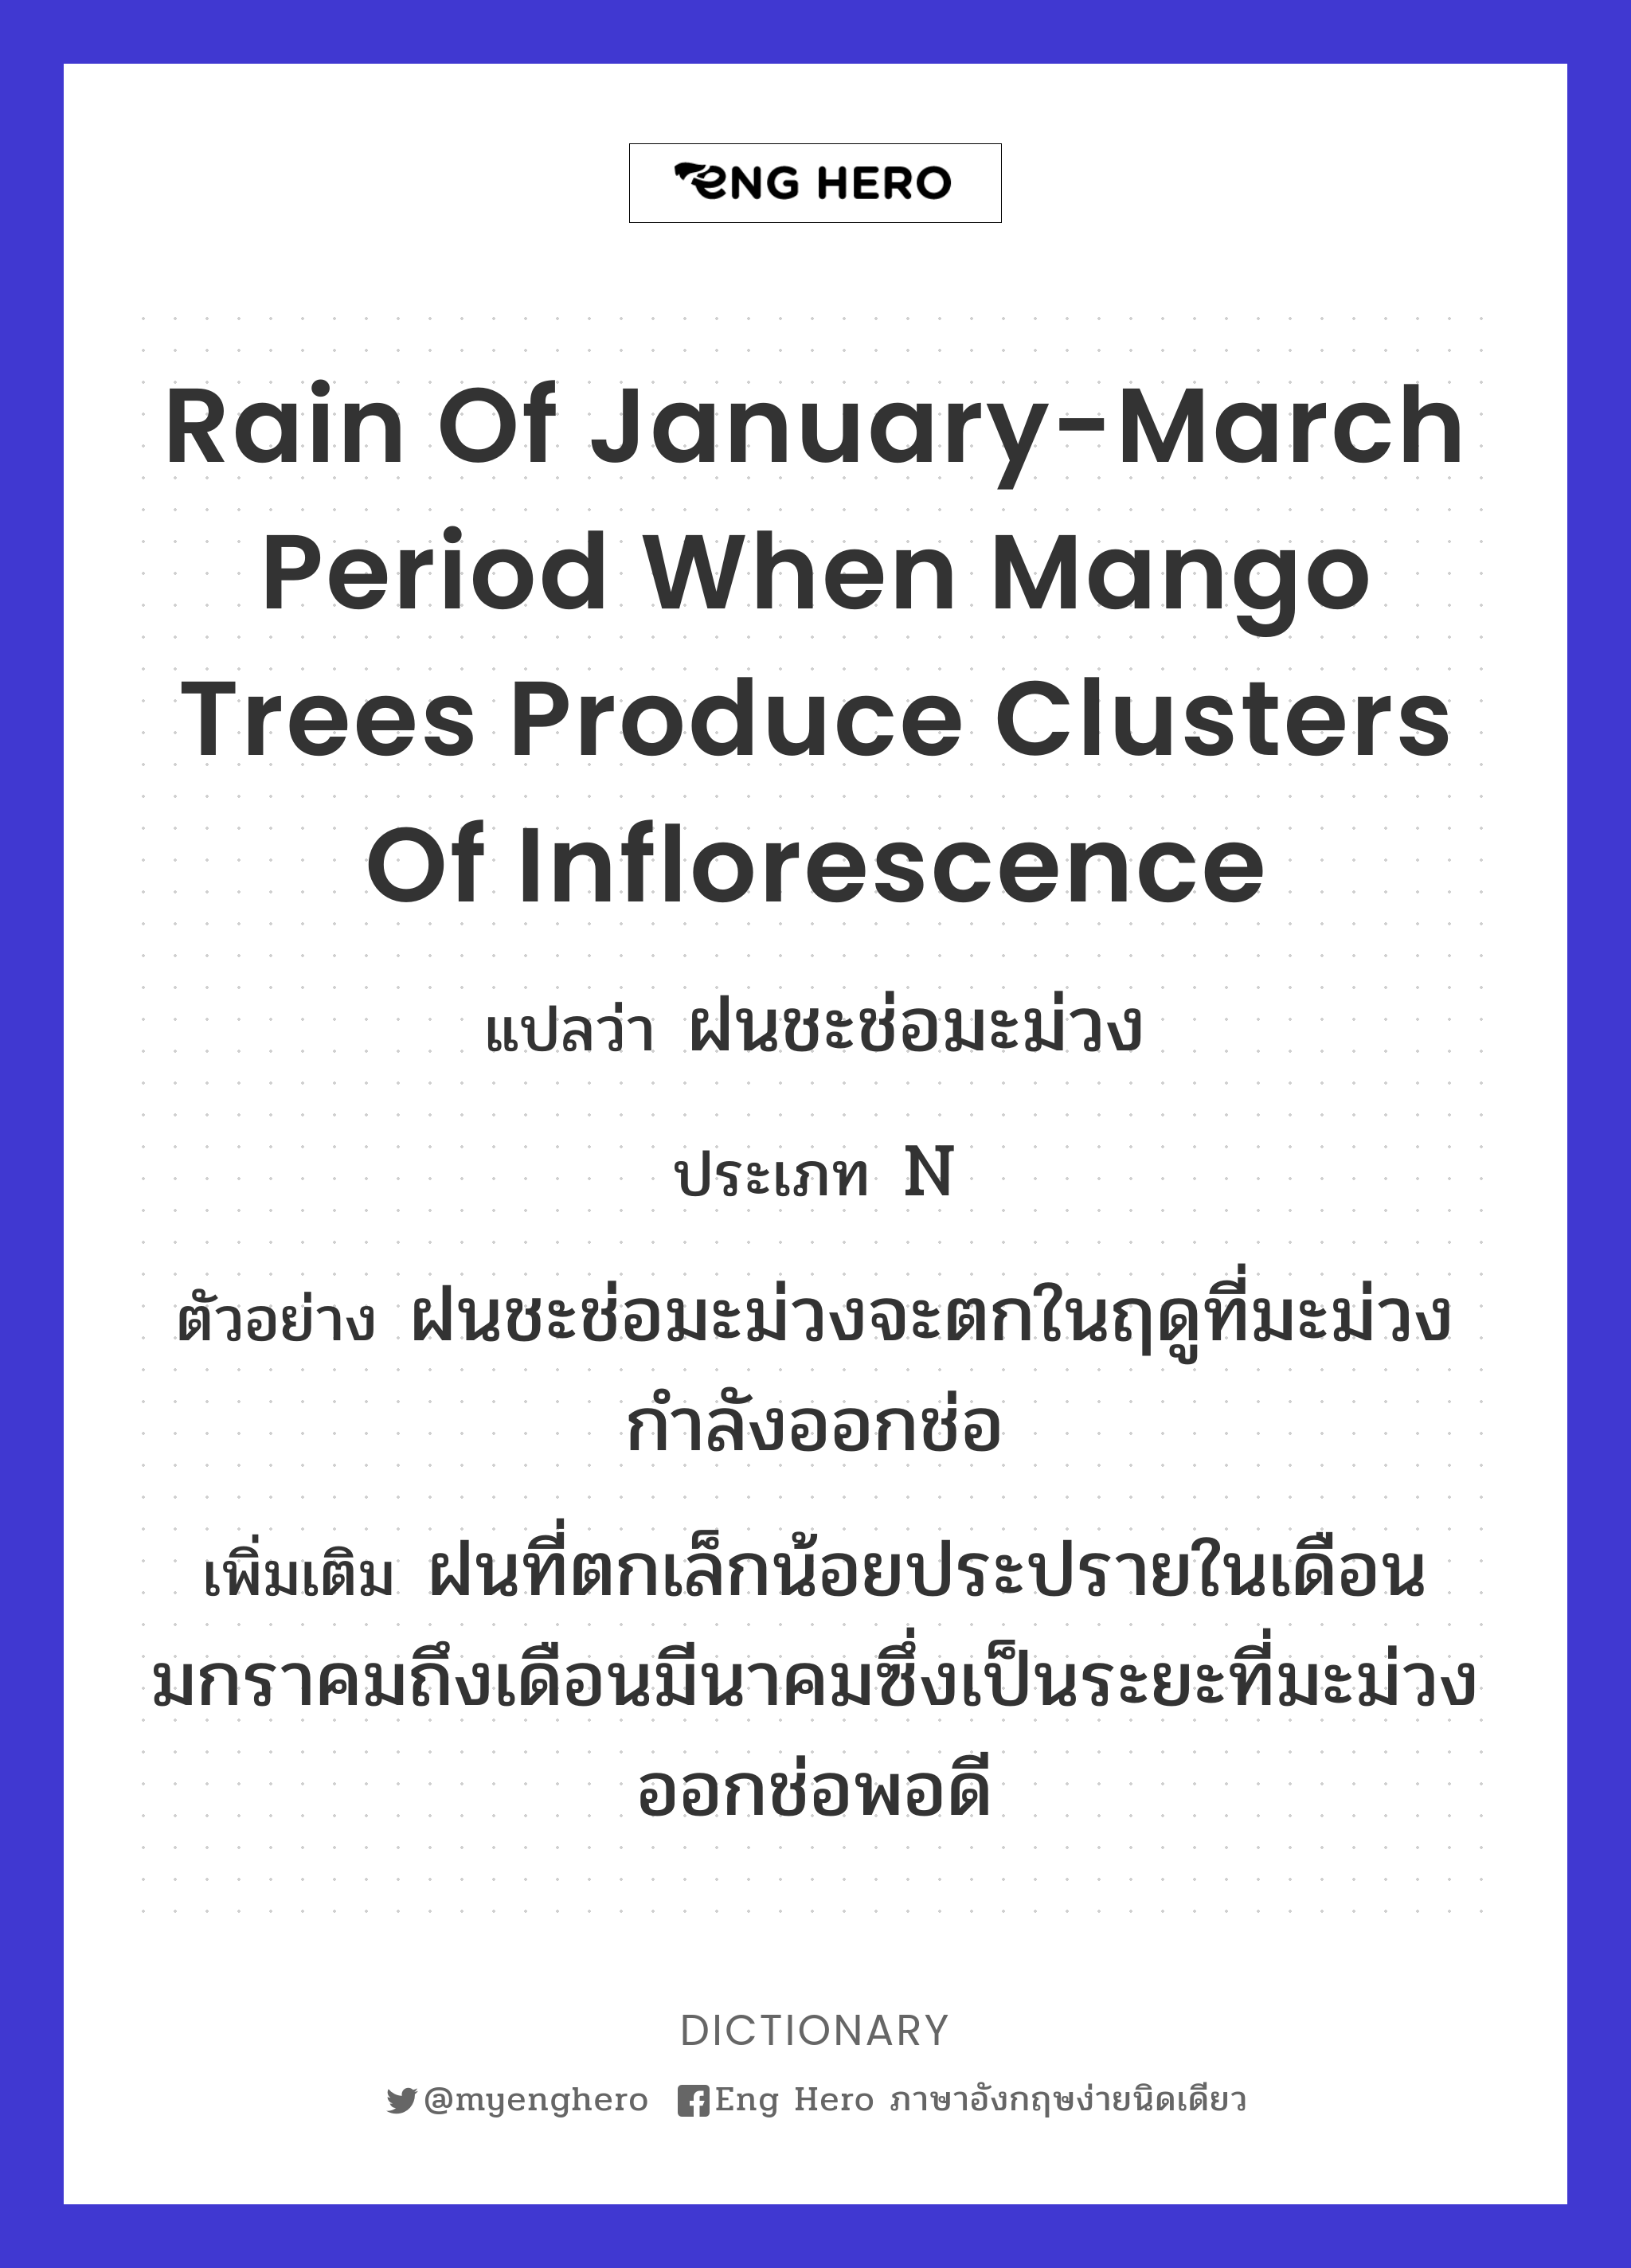 rain of January-March period when mango trees produce clusters of inflorescence